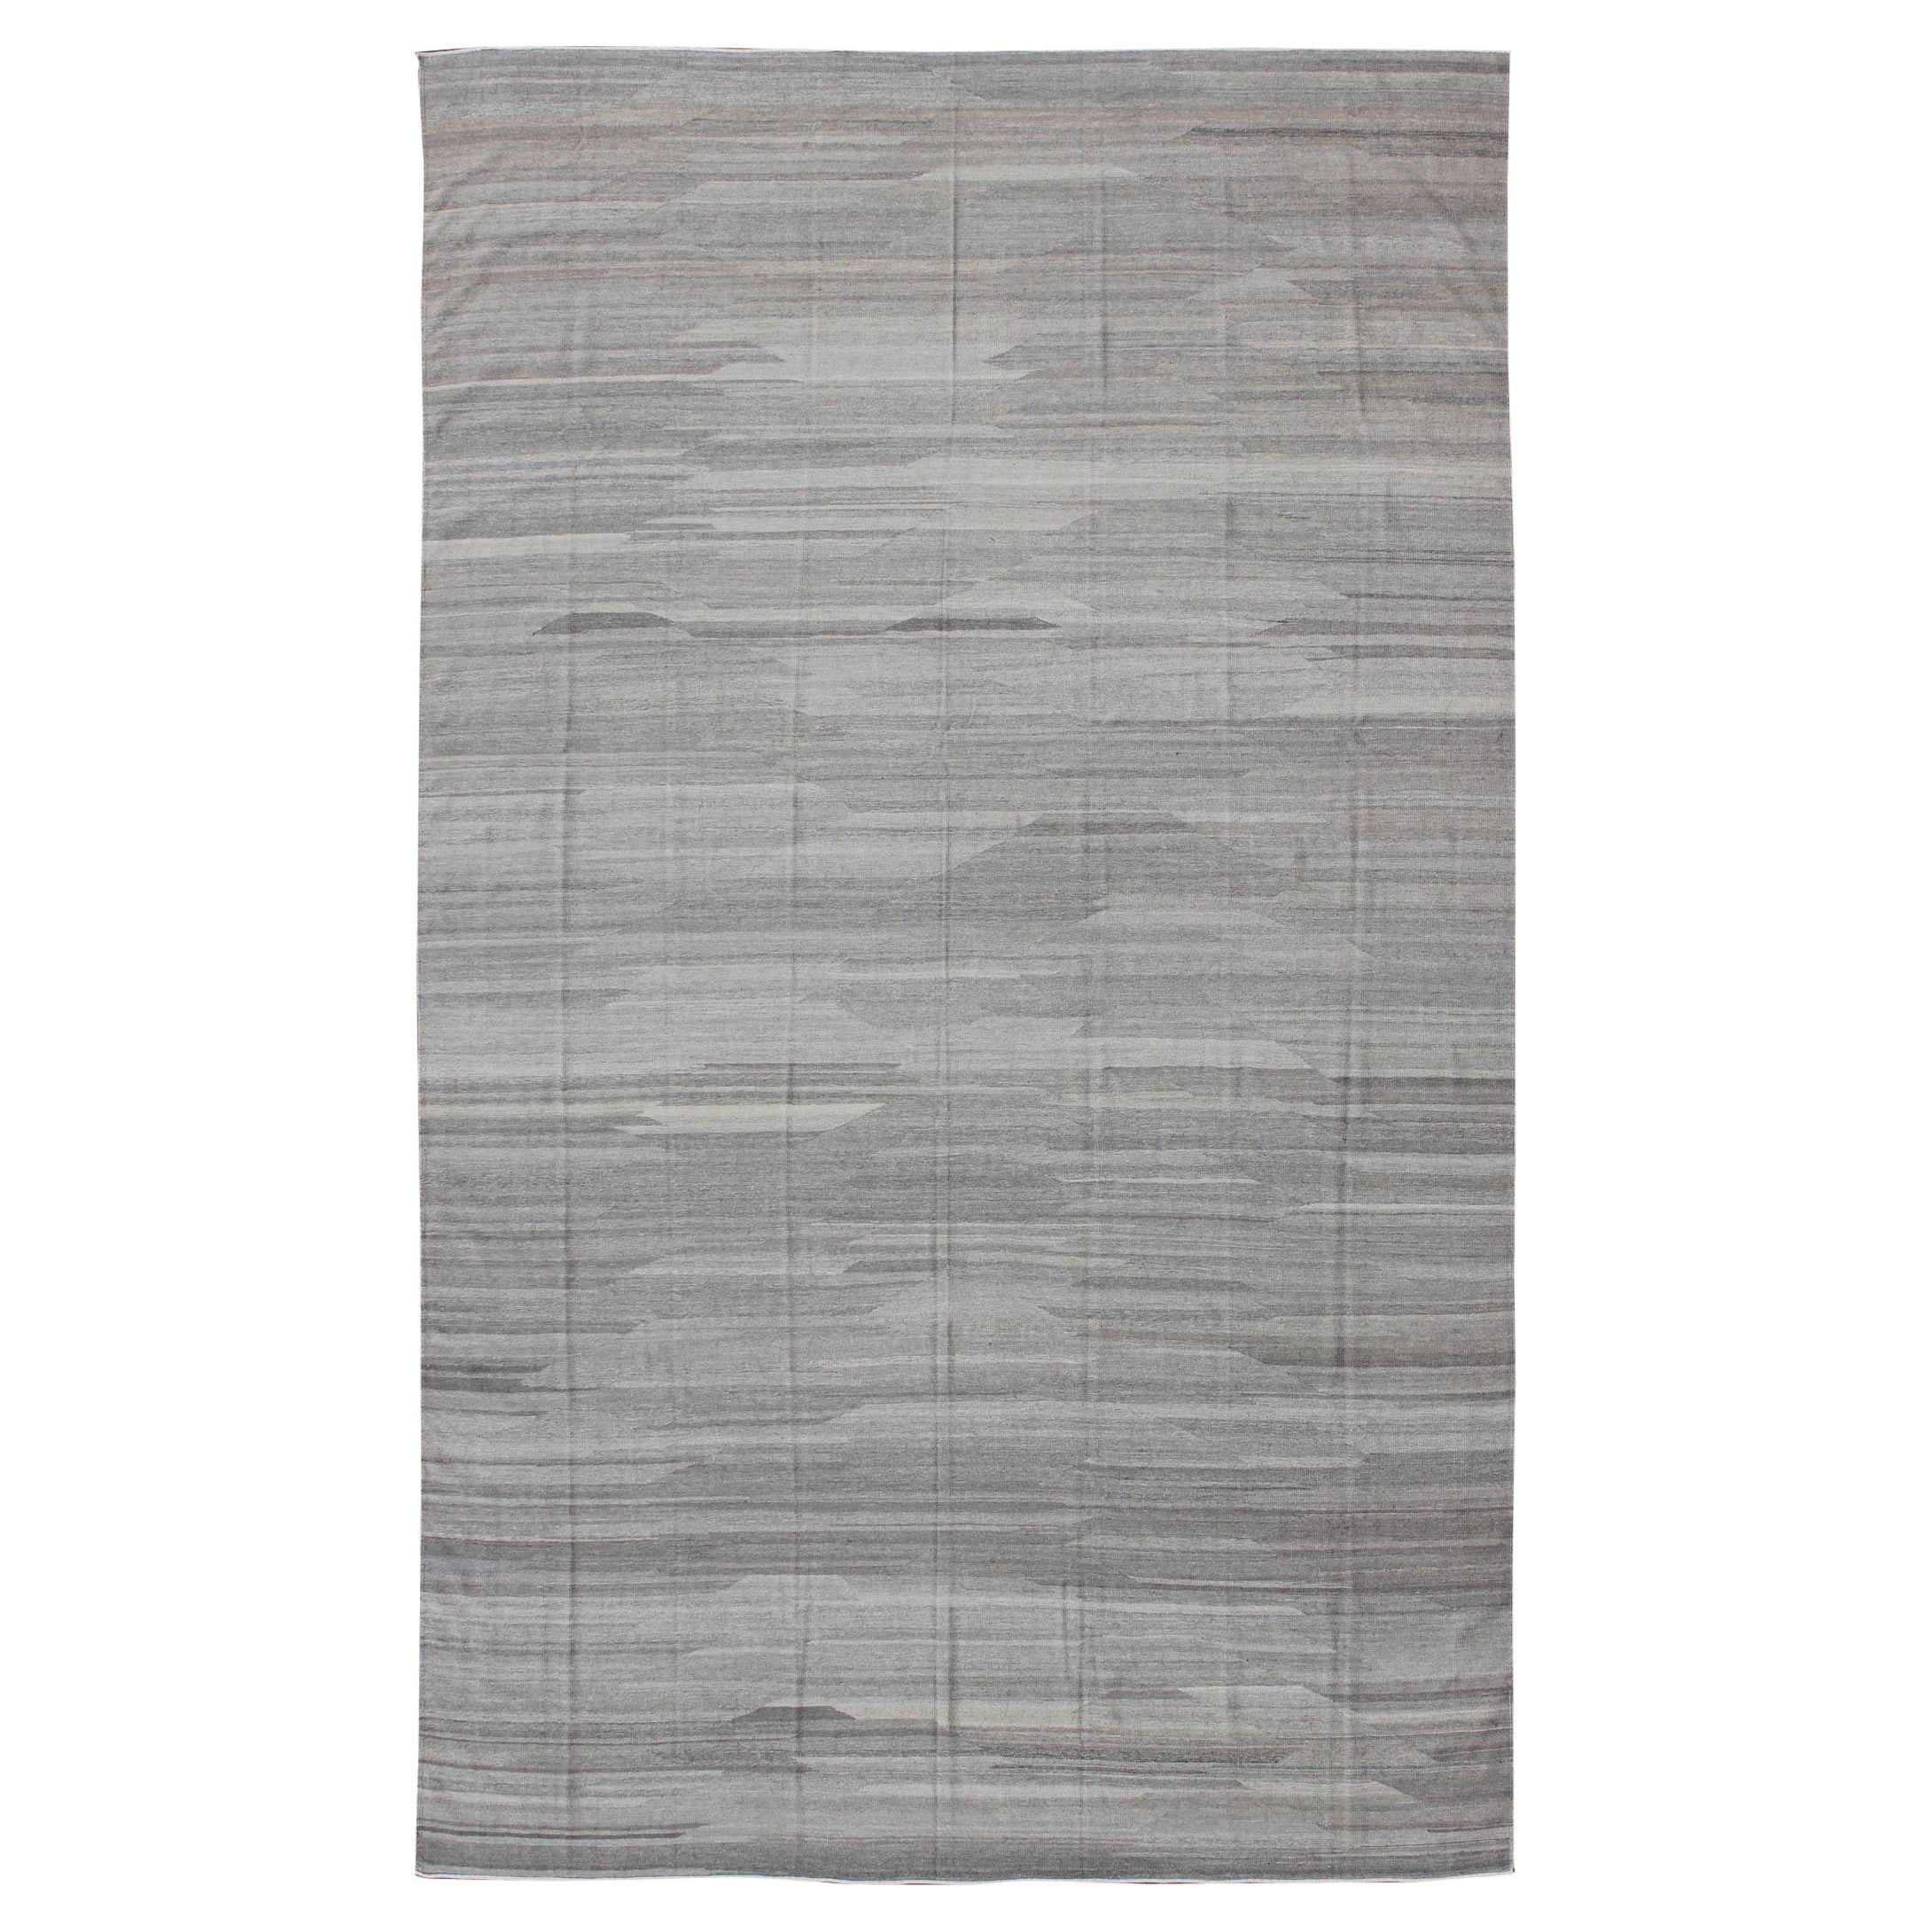 Very Large Modern Kilim with Solid Minimalist Design in Variation of Gray Tones